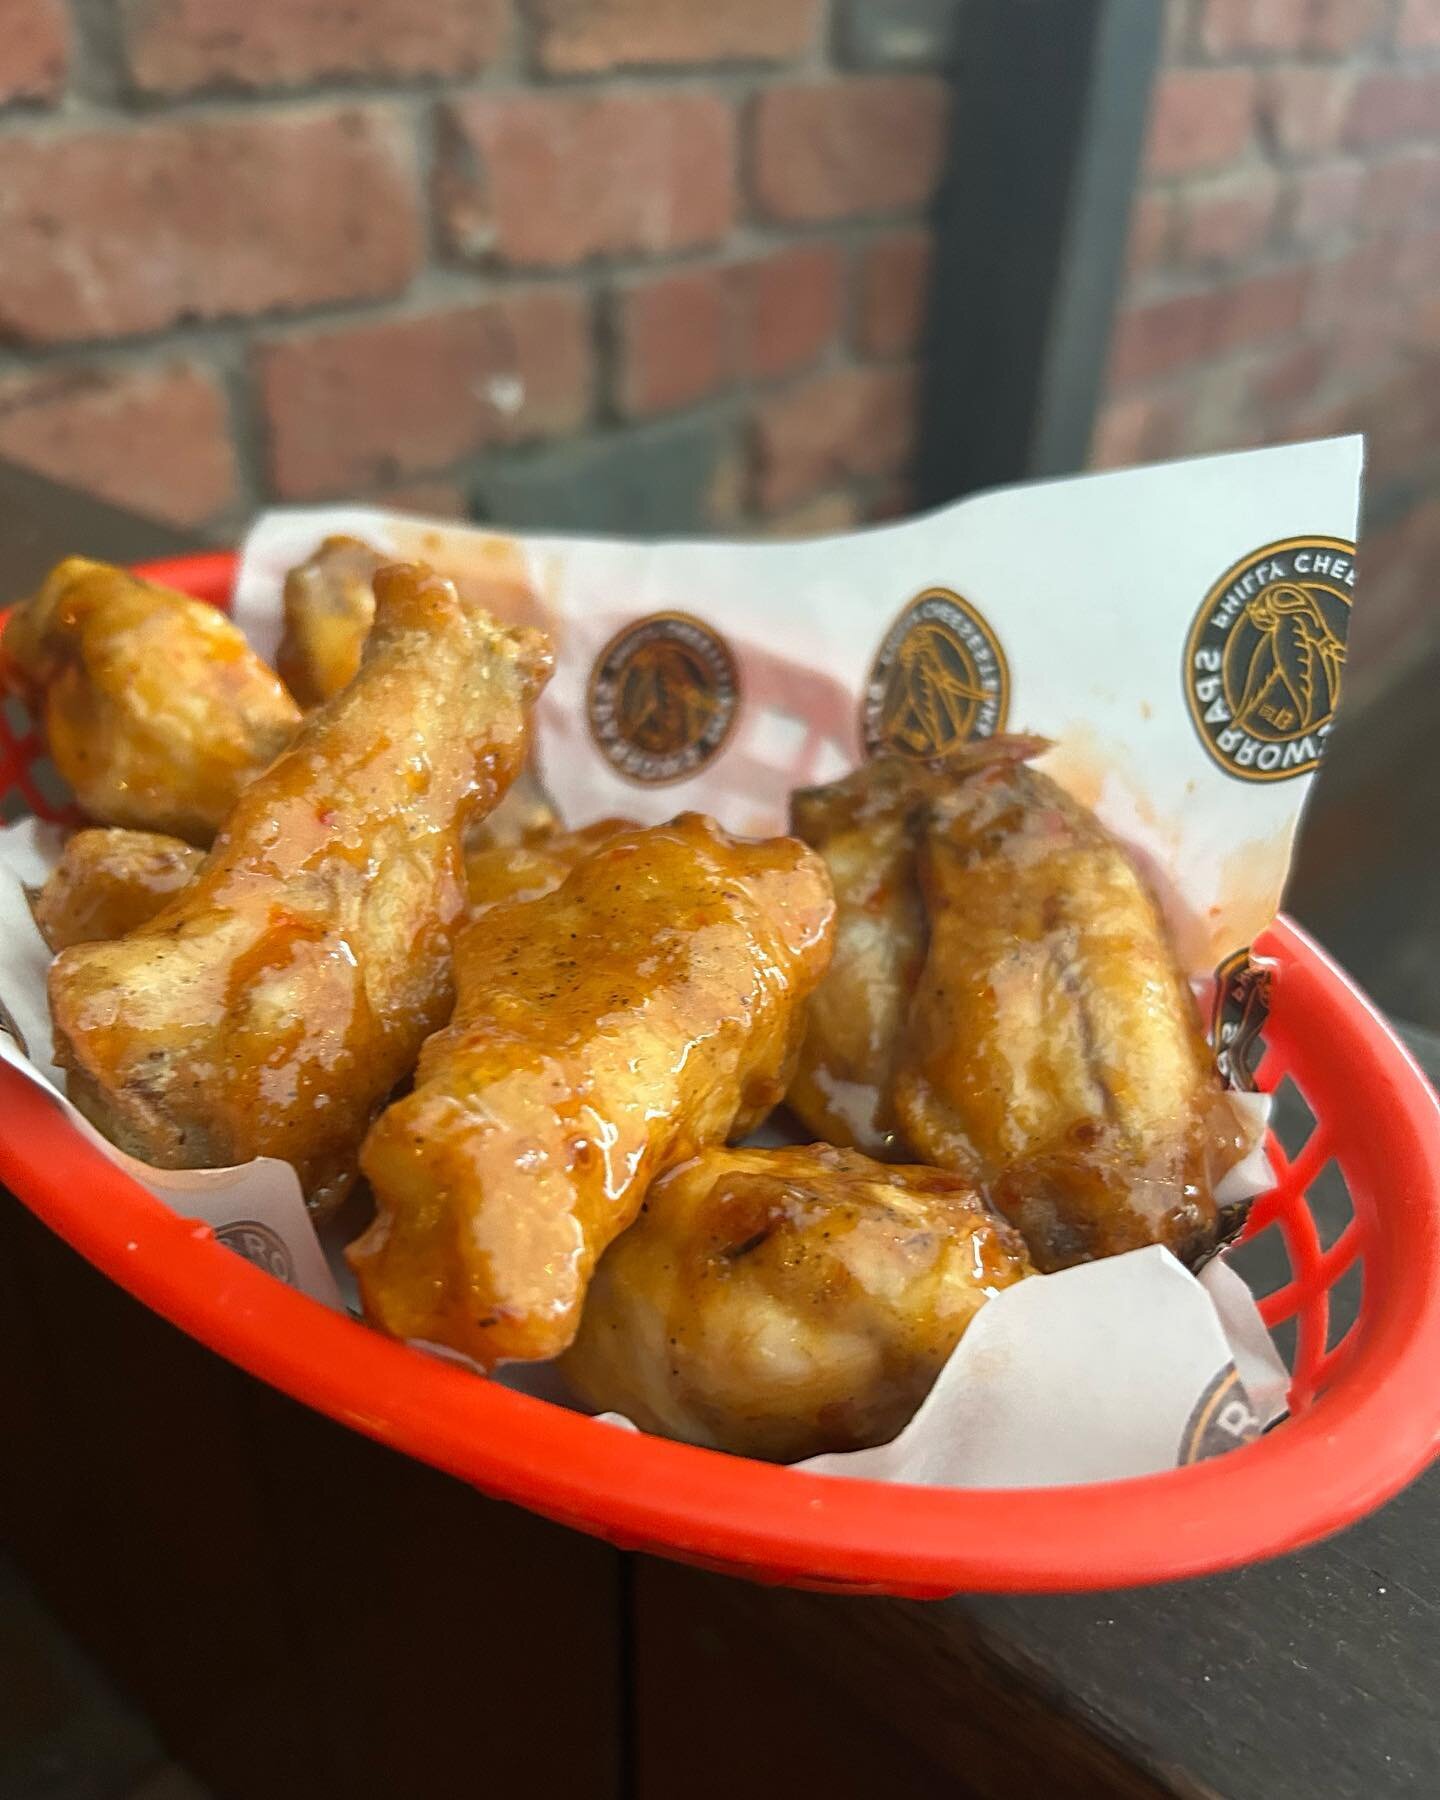 We&rsquo;ve got a wing special on tonight for Wing Wednesday 🤠
One night only!
Sweet chilli wings
$8 for 10 $4 for 5.. get &lsquo;em while they&rsquo;re hot!